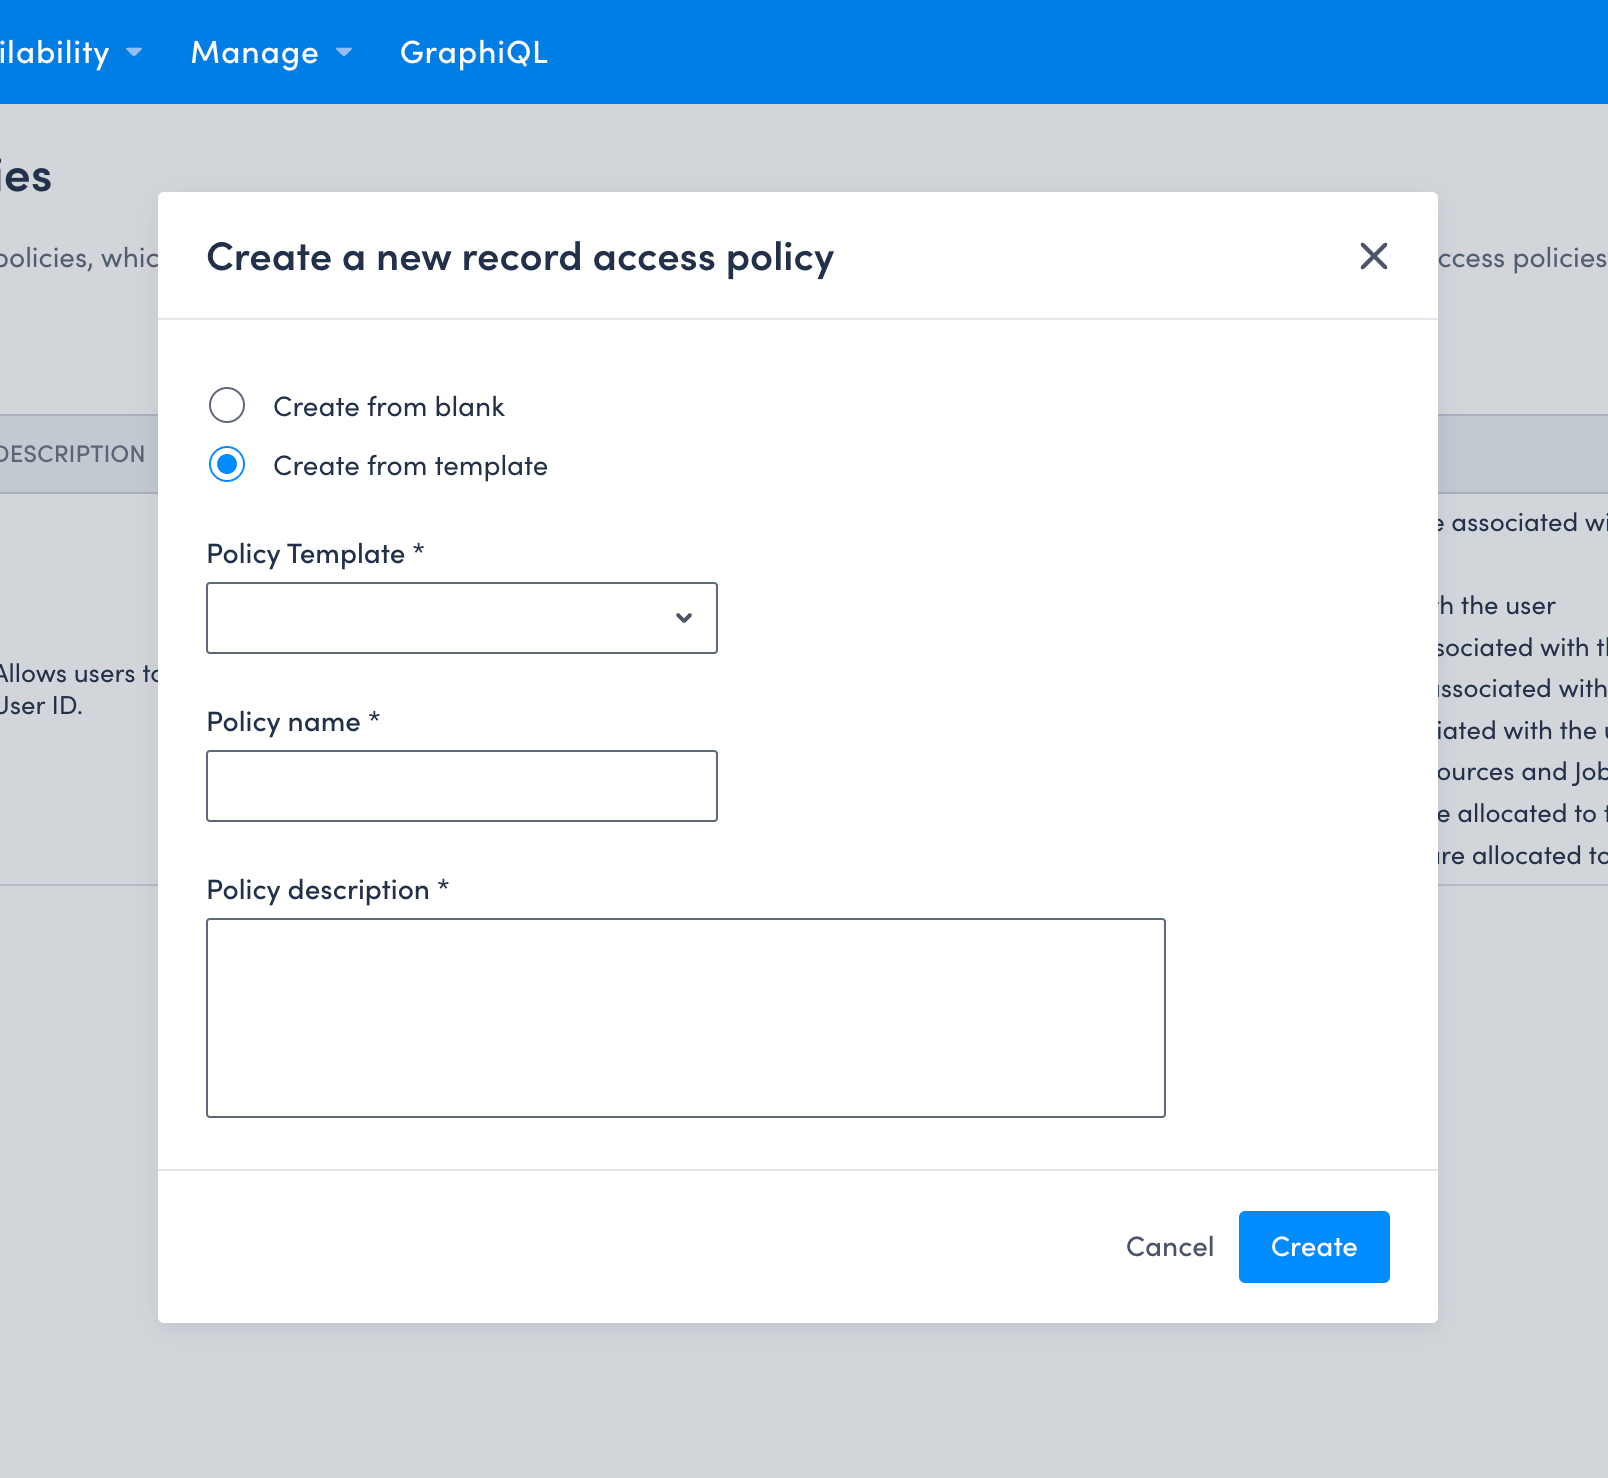 The create policy modal